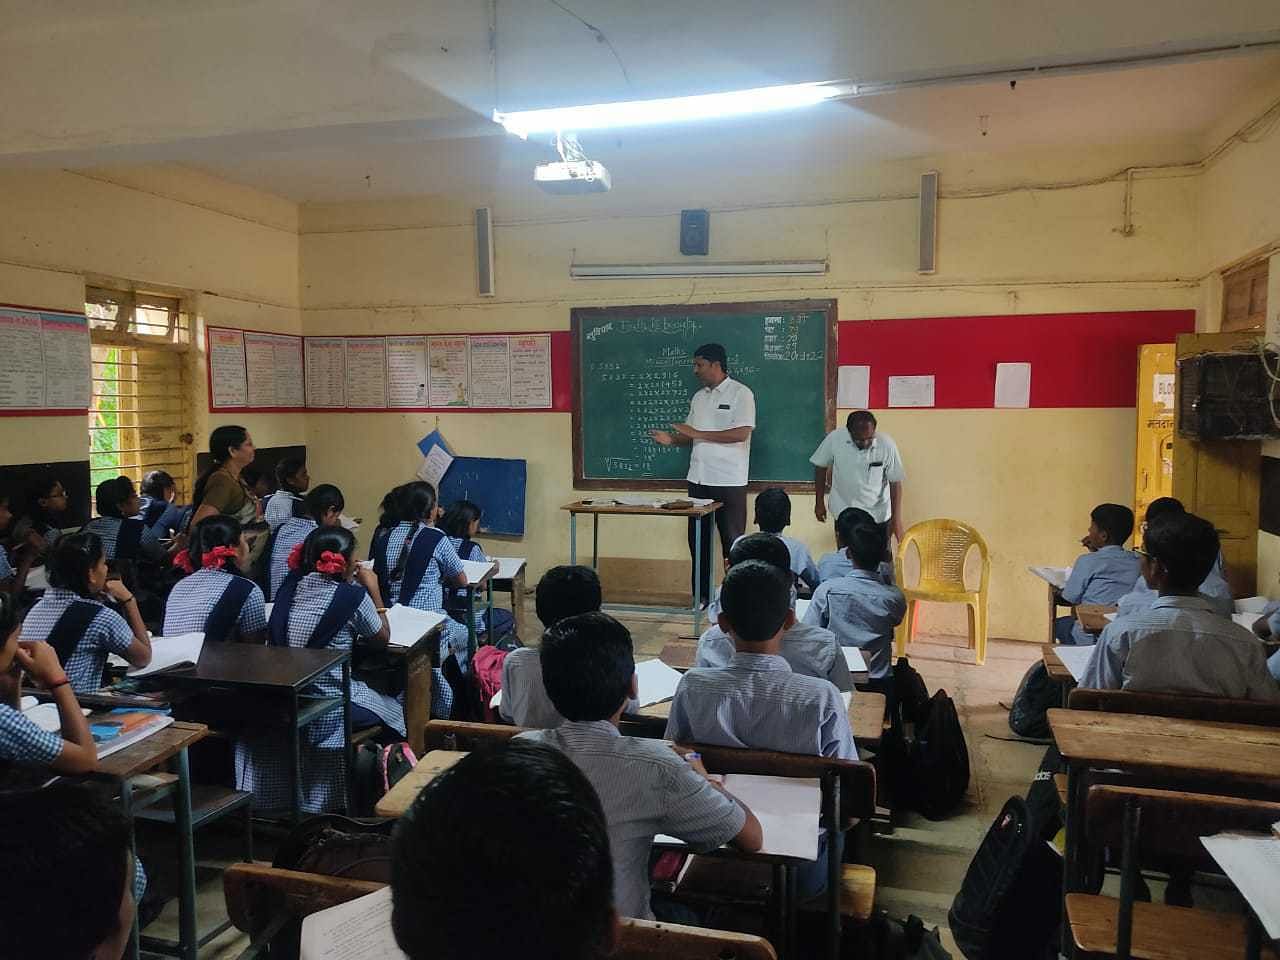 Sarpanch Vijay Mohite explaining the importance of studying everyday with a dedication | Photo: Vijay Mohite, Vadgaon sarpanch